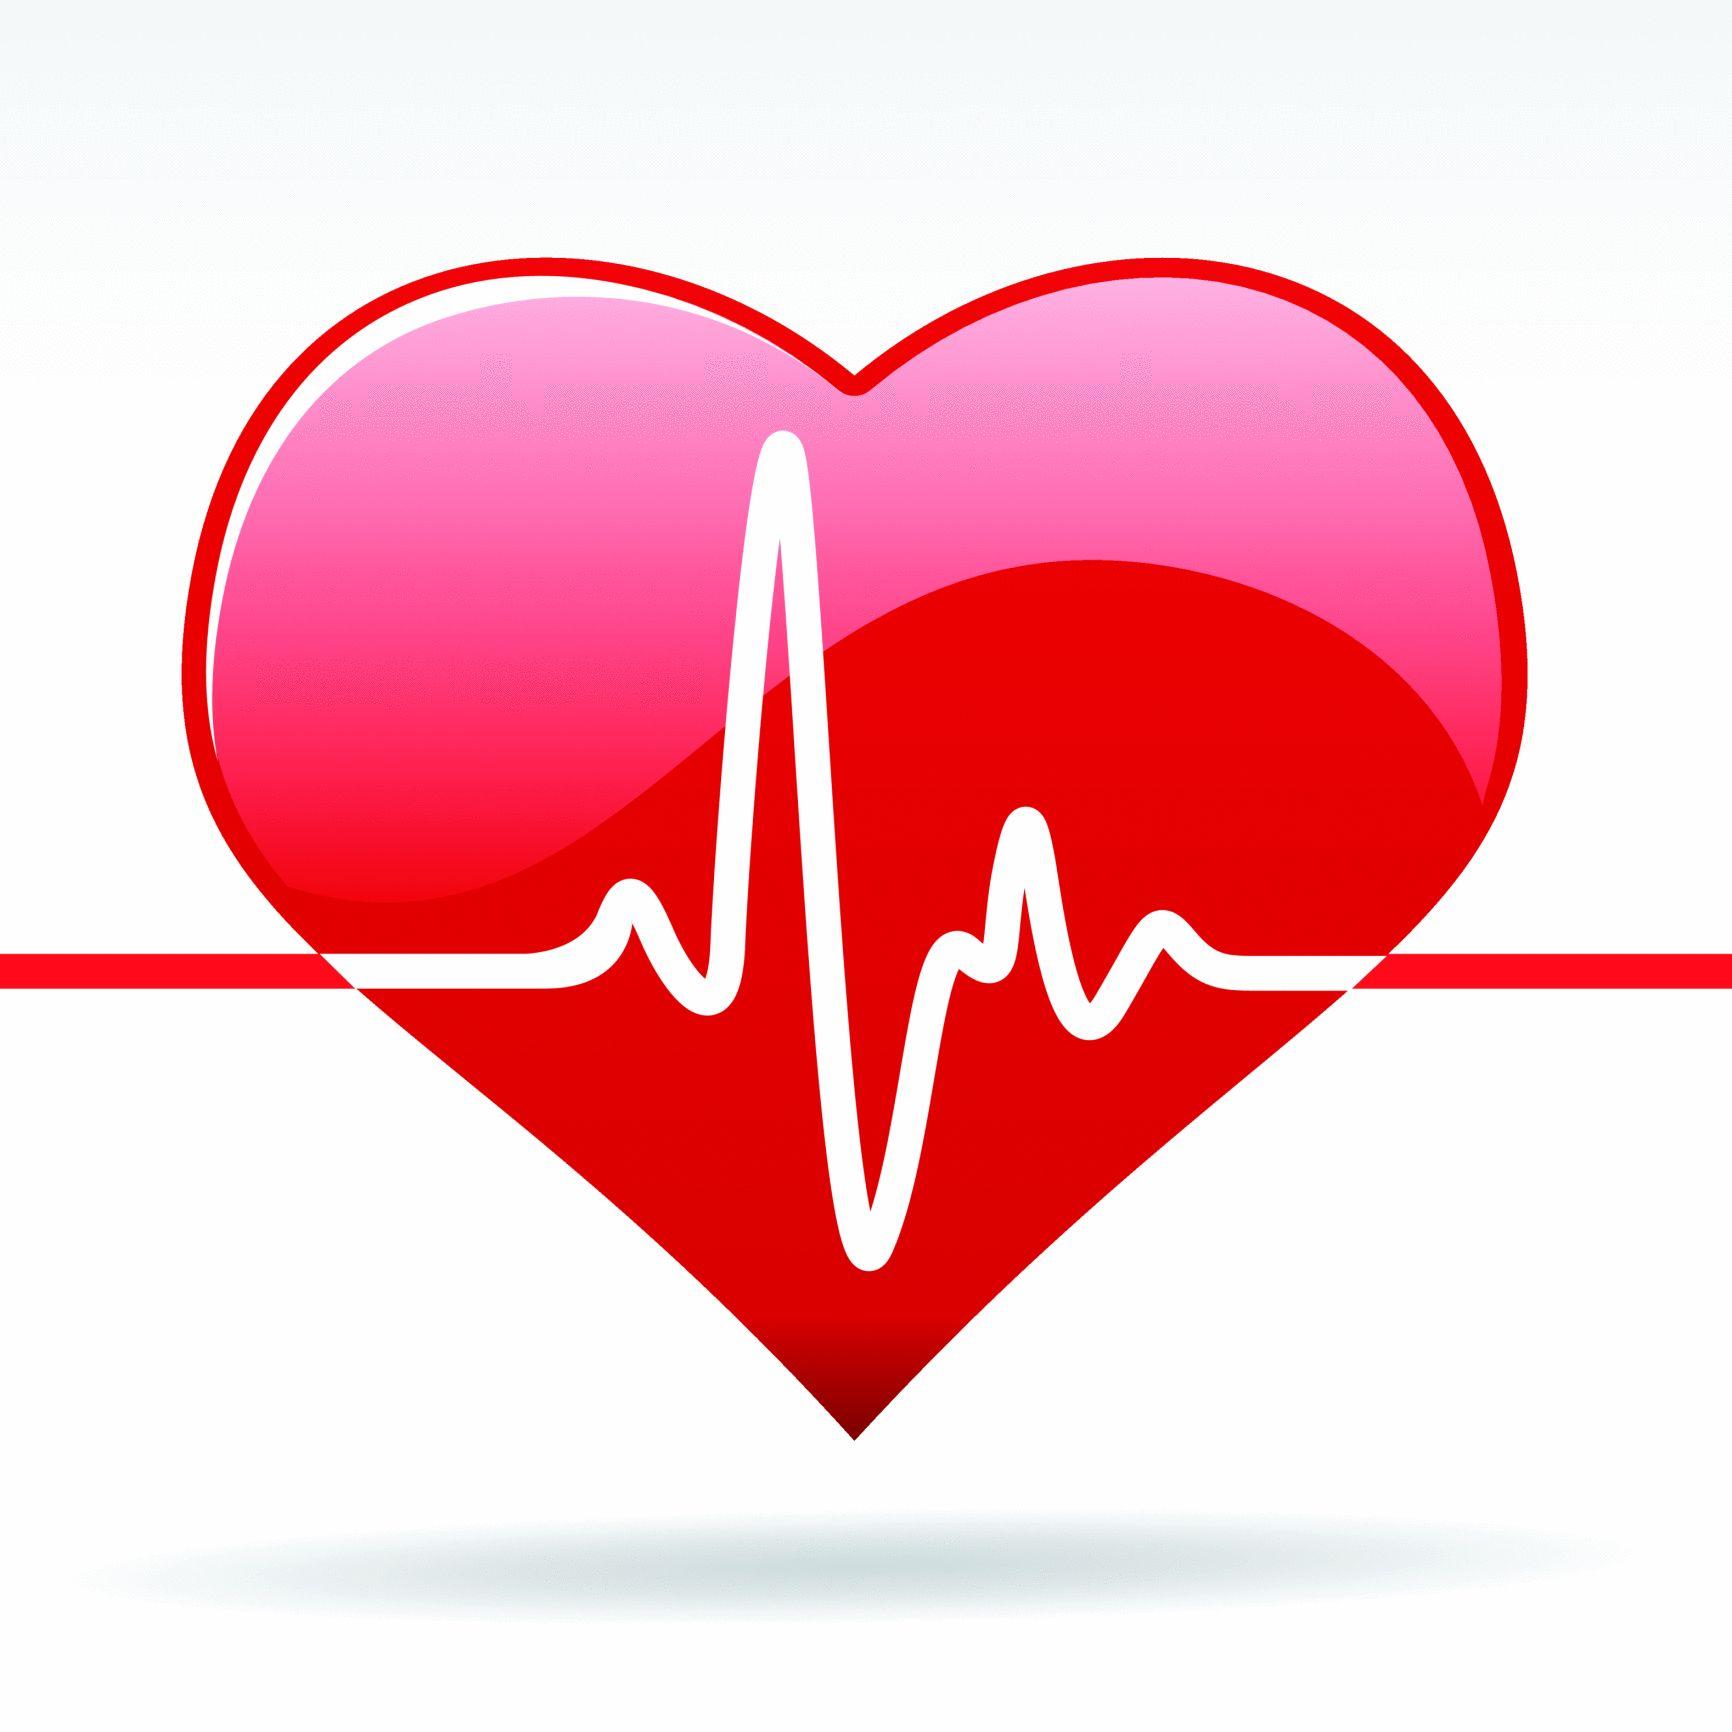 Medical Heart Logo - Medical Heart Clipart | Free download best Medical Heart Clipart on ...